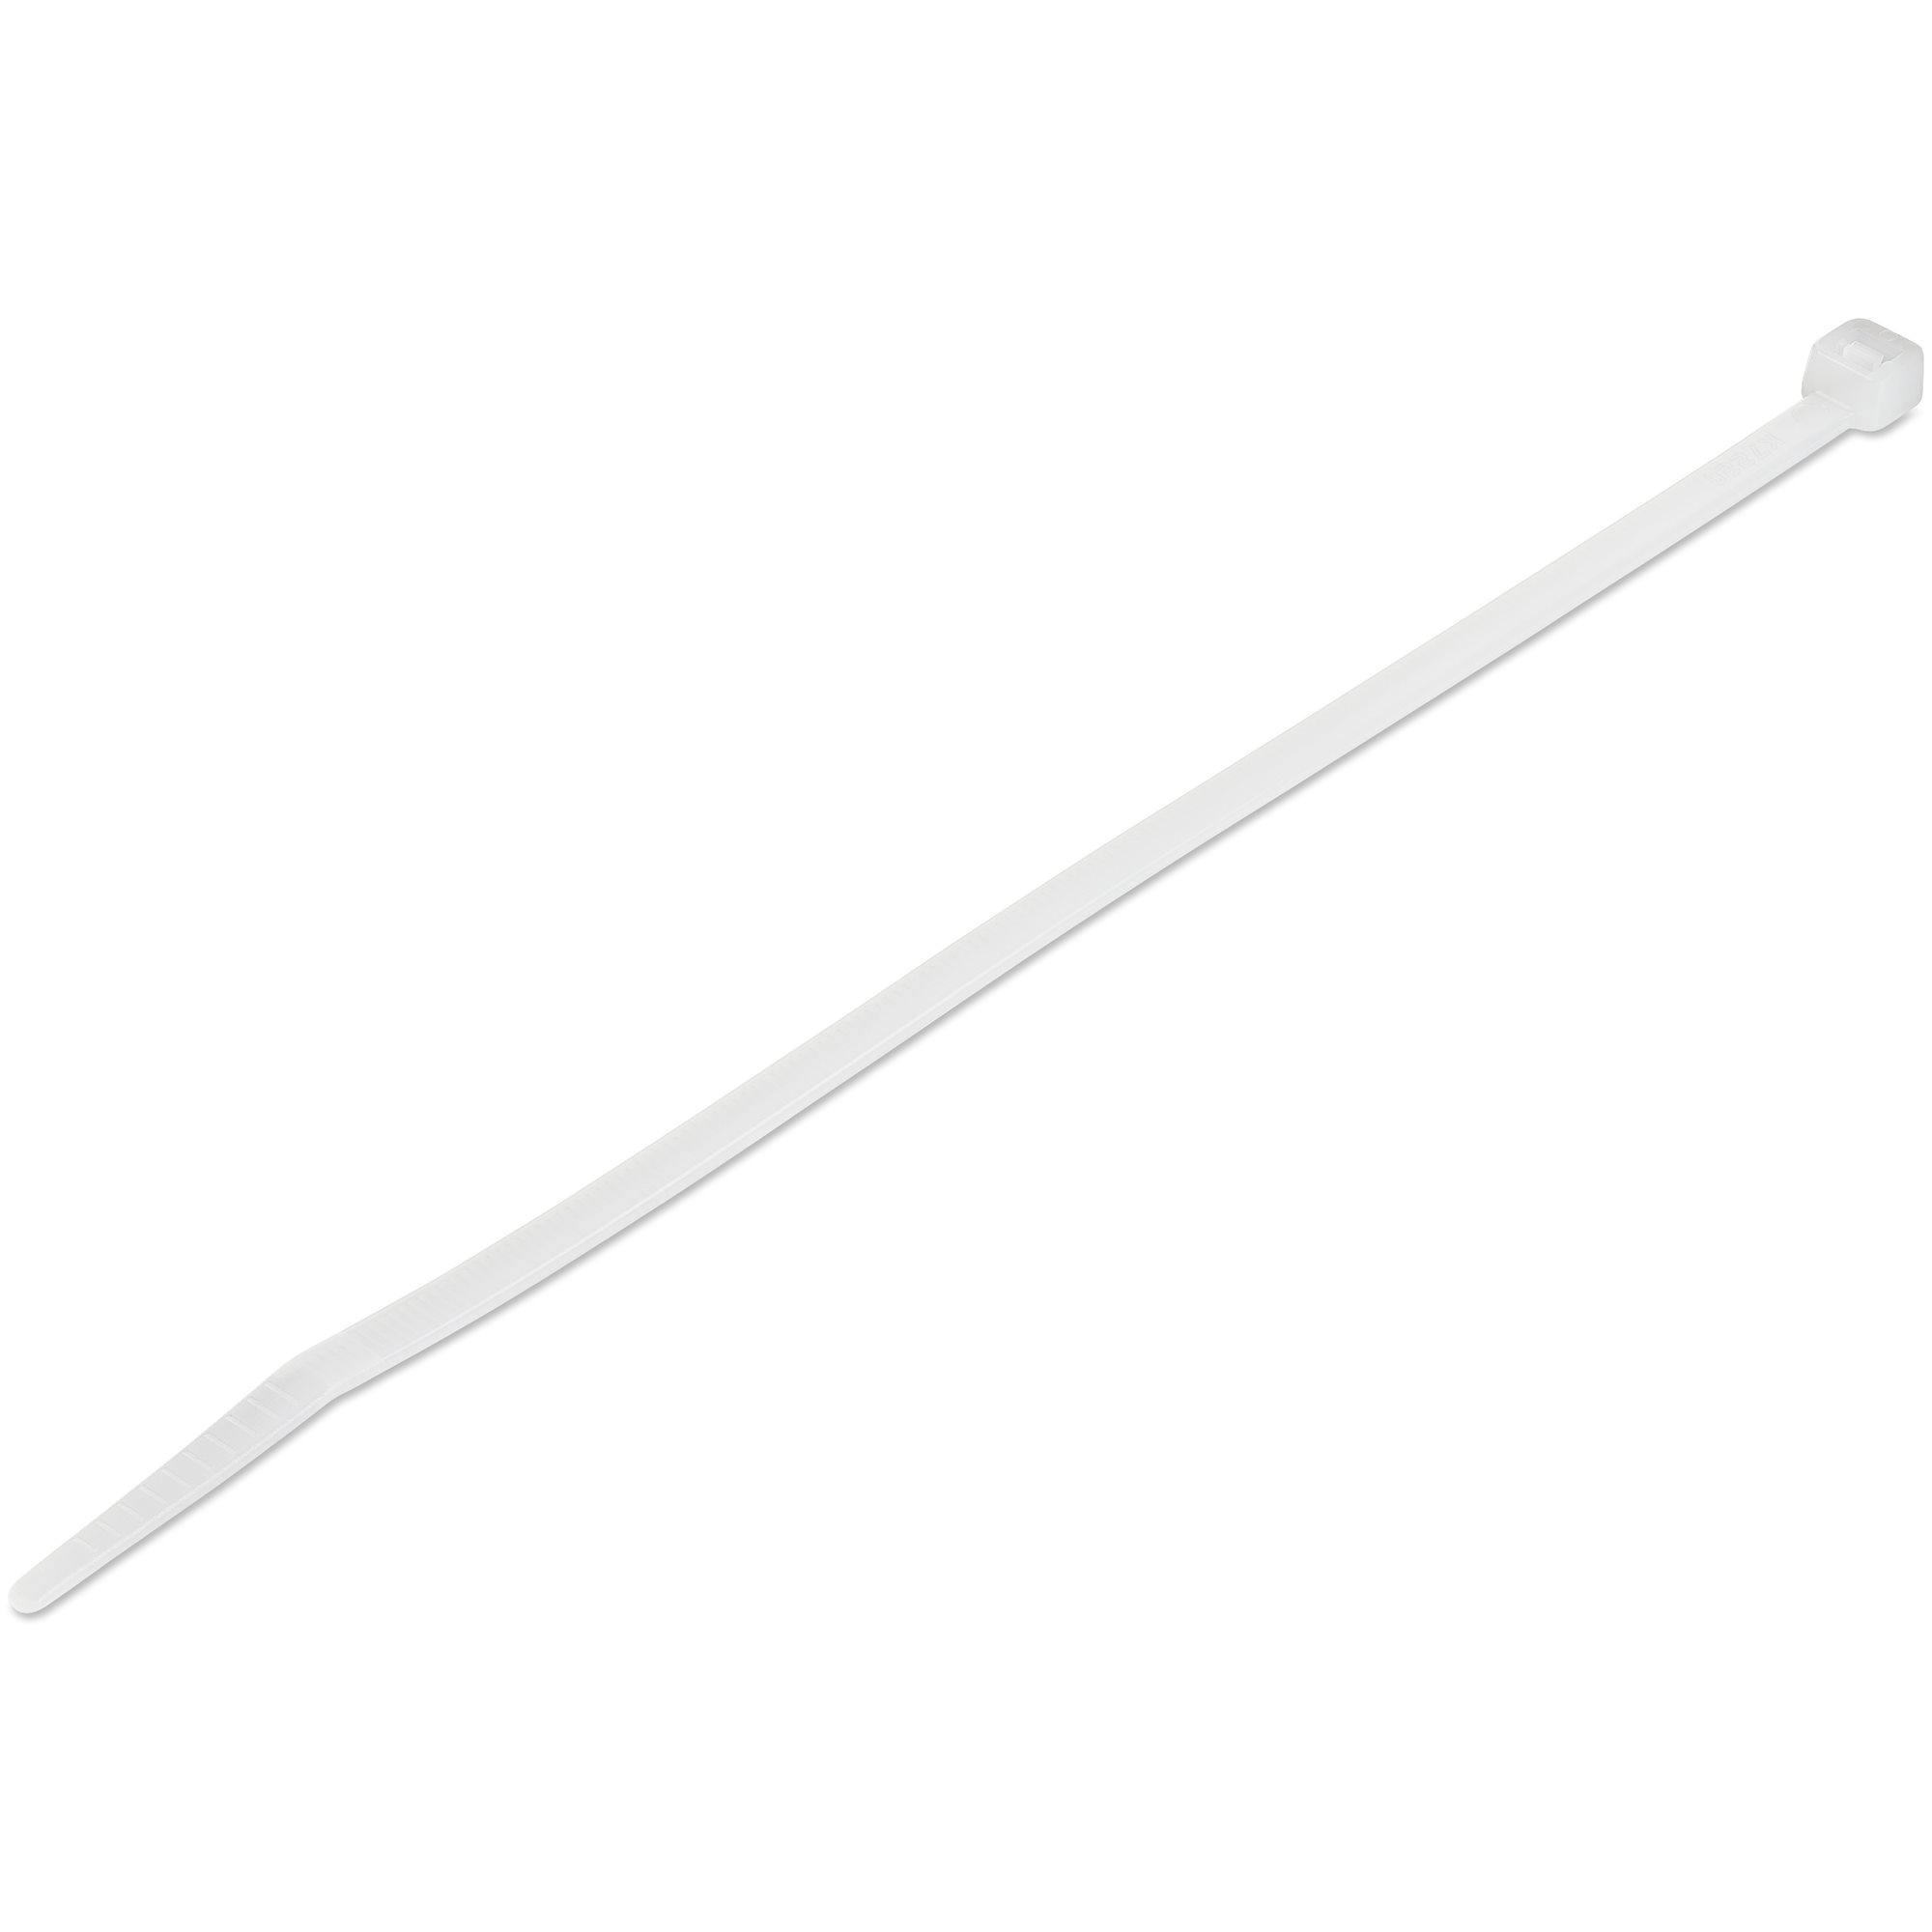 【CBMZT8NK】1000 PACK 8" WHITE CABLE TIES